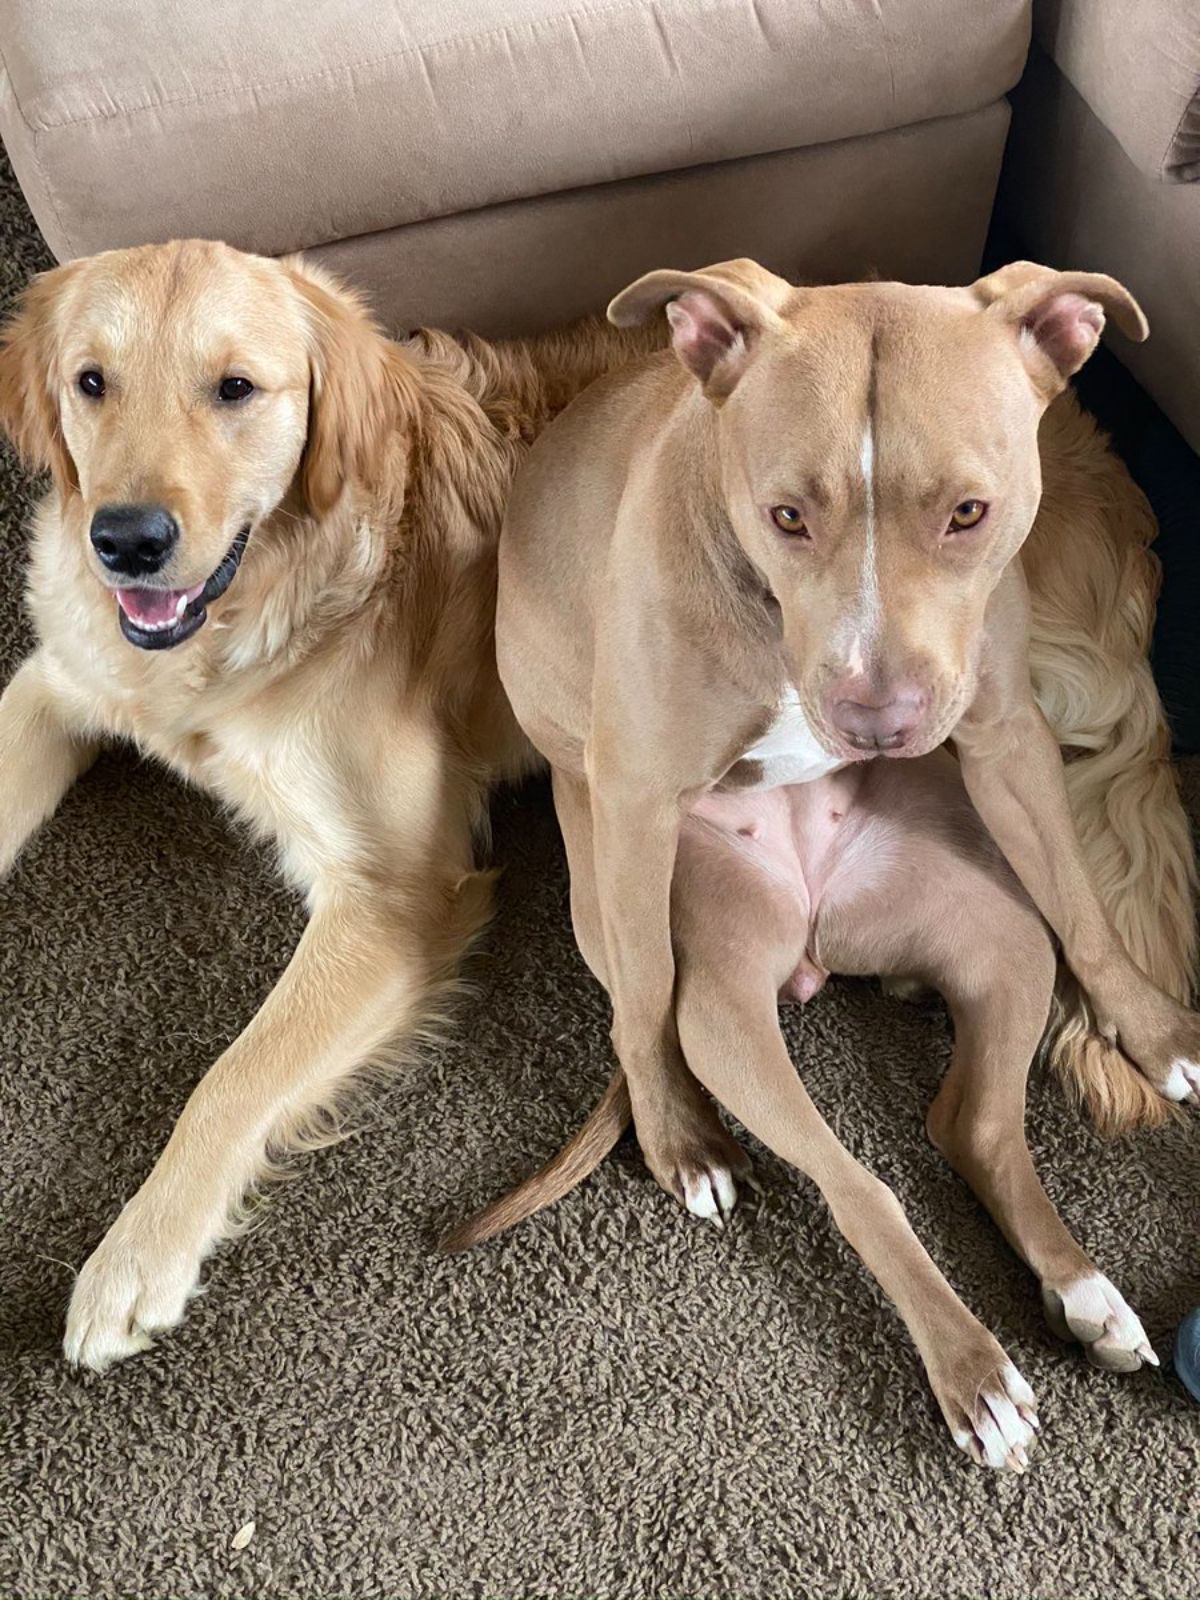 brown and white pitbull sitting on its haunches with the back legs stretched forward next to a golden retreiver